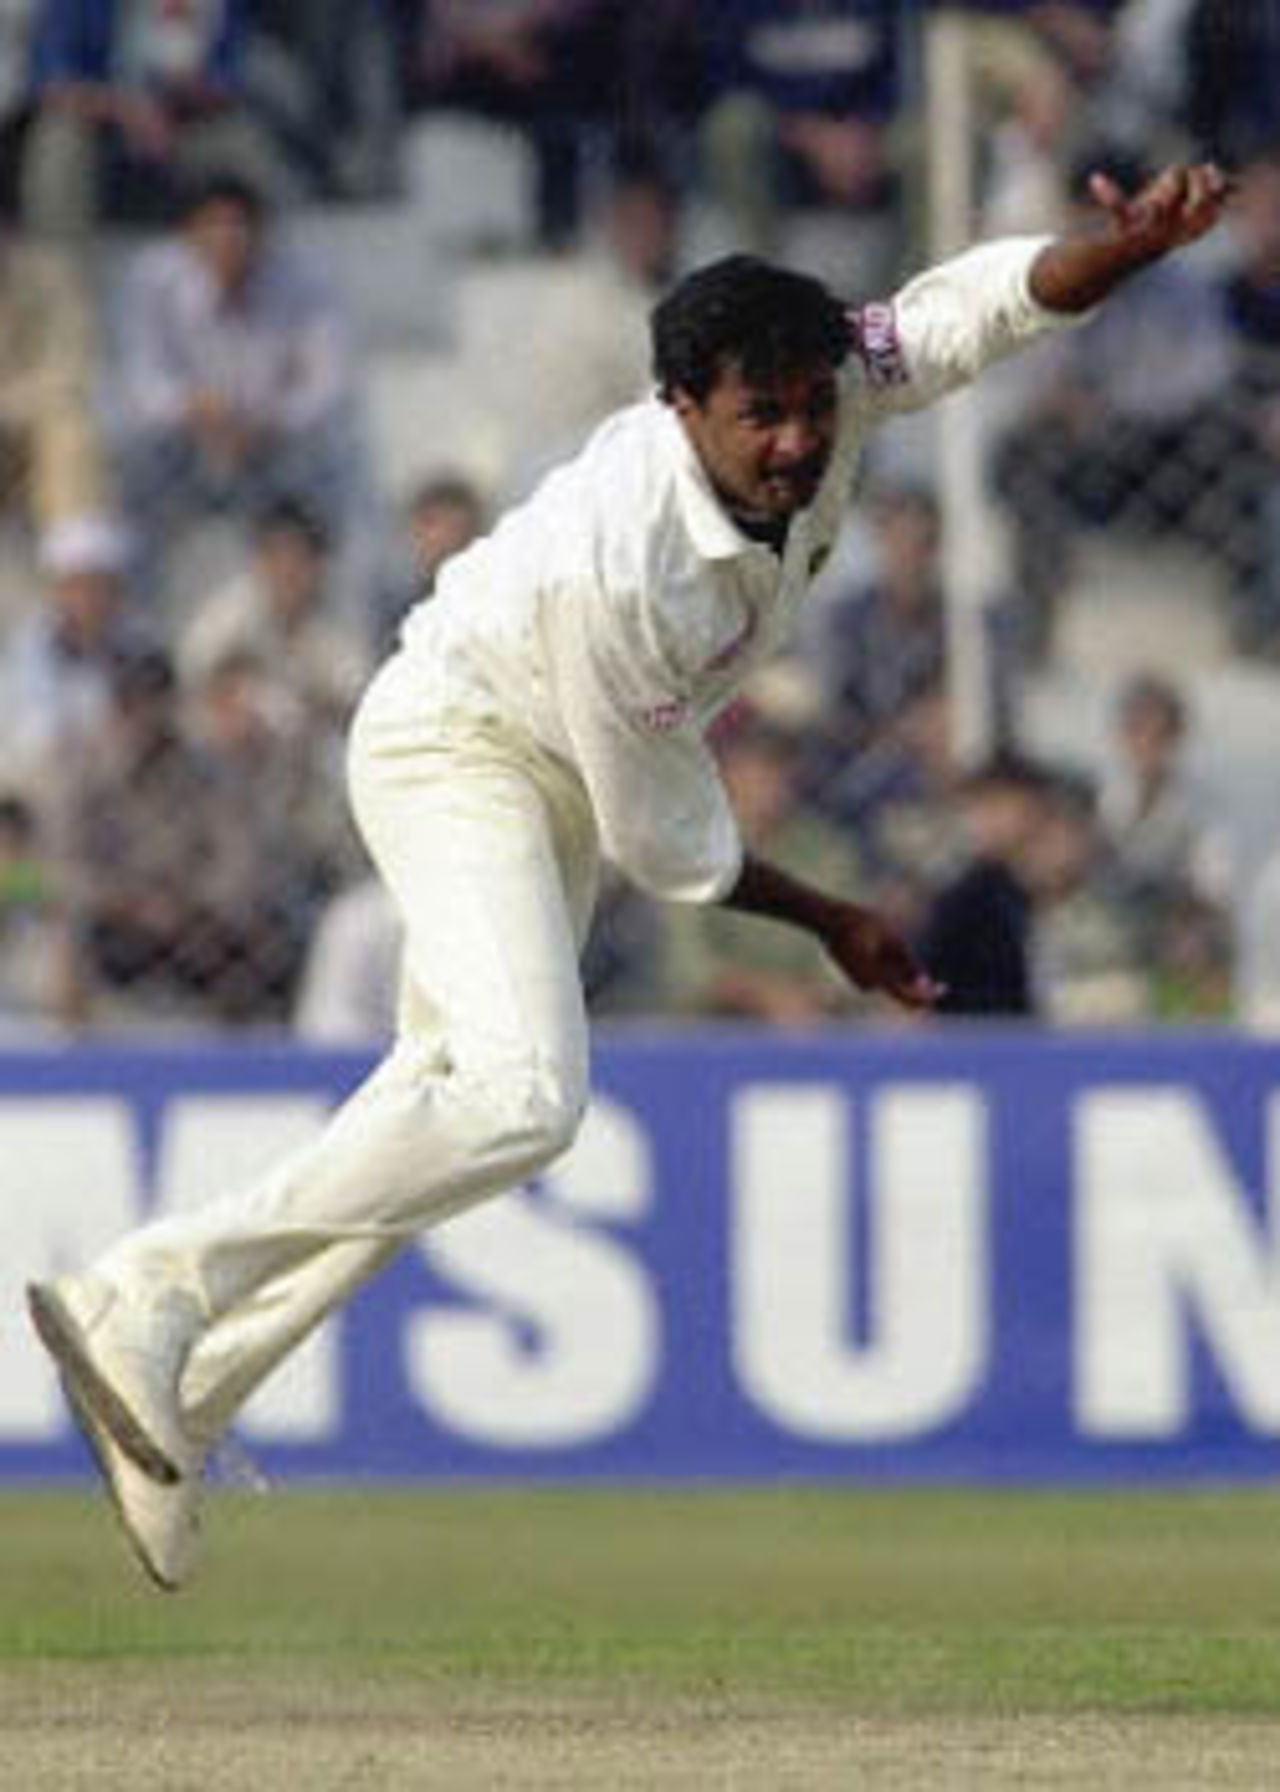 Indian pace bowler Javagal Srinath follows through on the first day of the first cricket Test match between India and Zimbabwe. Srinath took three wickets for India to restrict Zimbabwe to 232 for 5 wickets at the end of the day's play. Zimbabwe in India, 2000/01, 1st Test, India v Zimbabwe, Feroz Shah Kotla, Delhi, 18-22 November 2000 (Day 1).